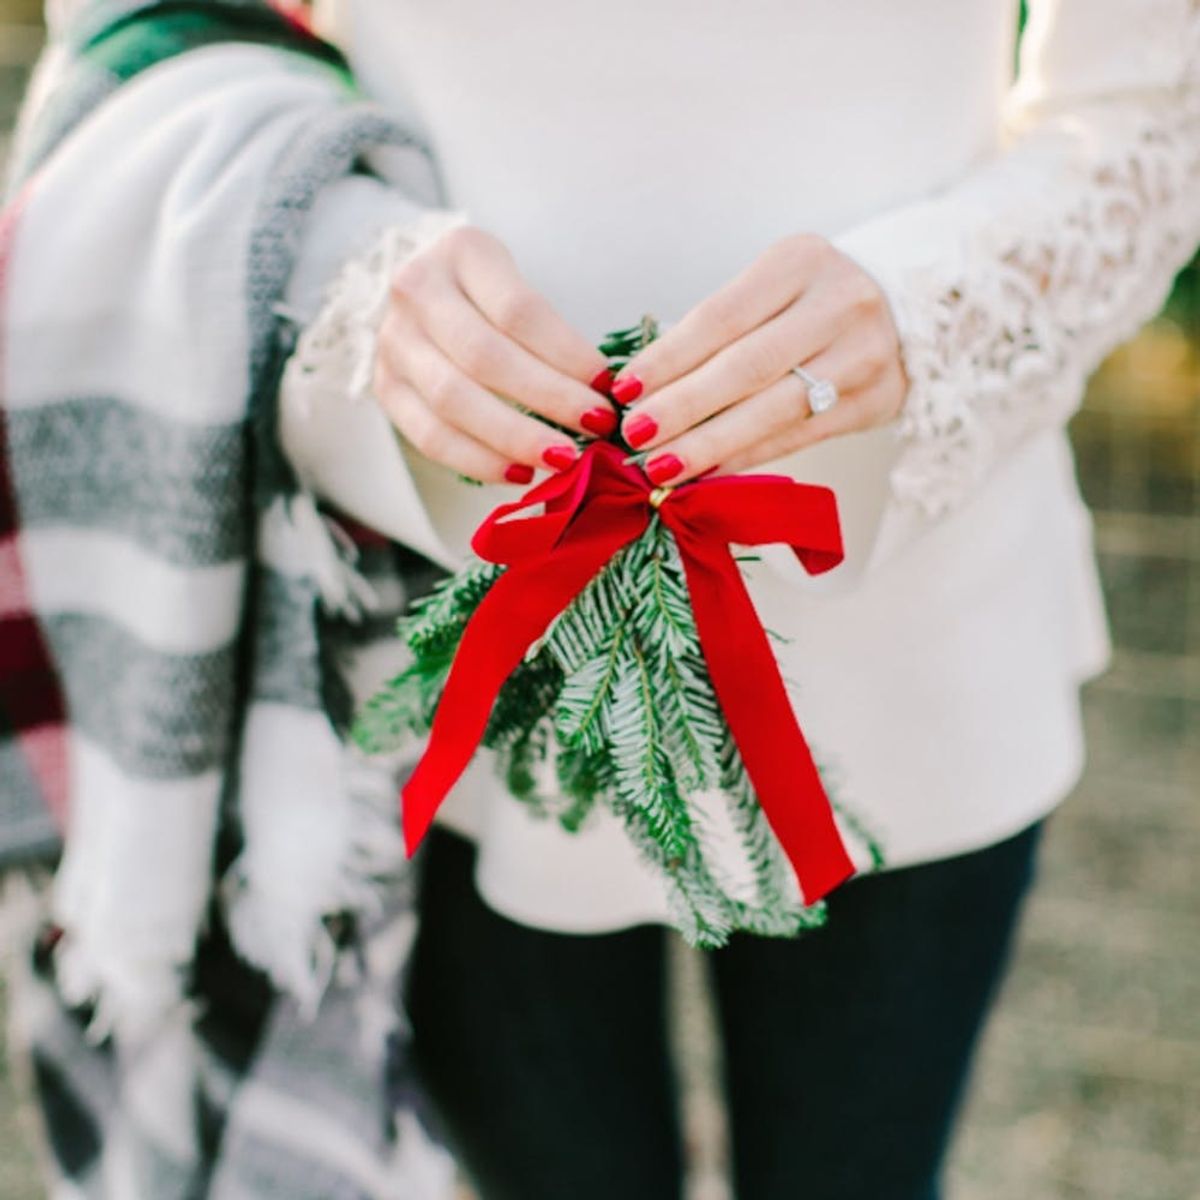 The Cutest Winter + Holiday Engagement Announcement Ideas